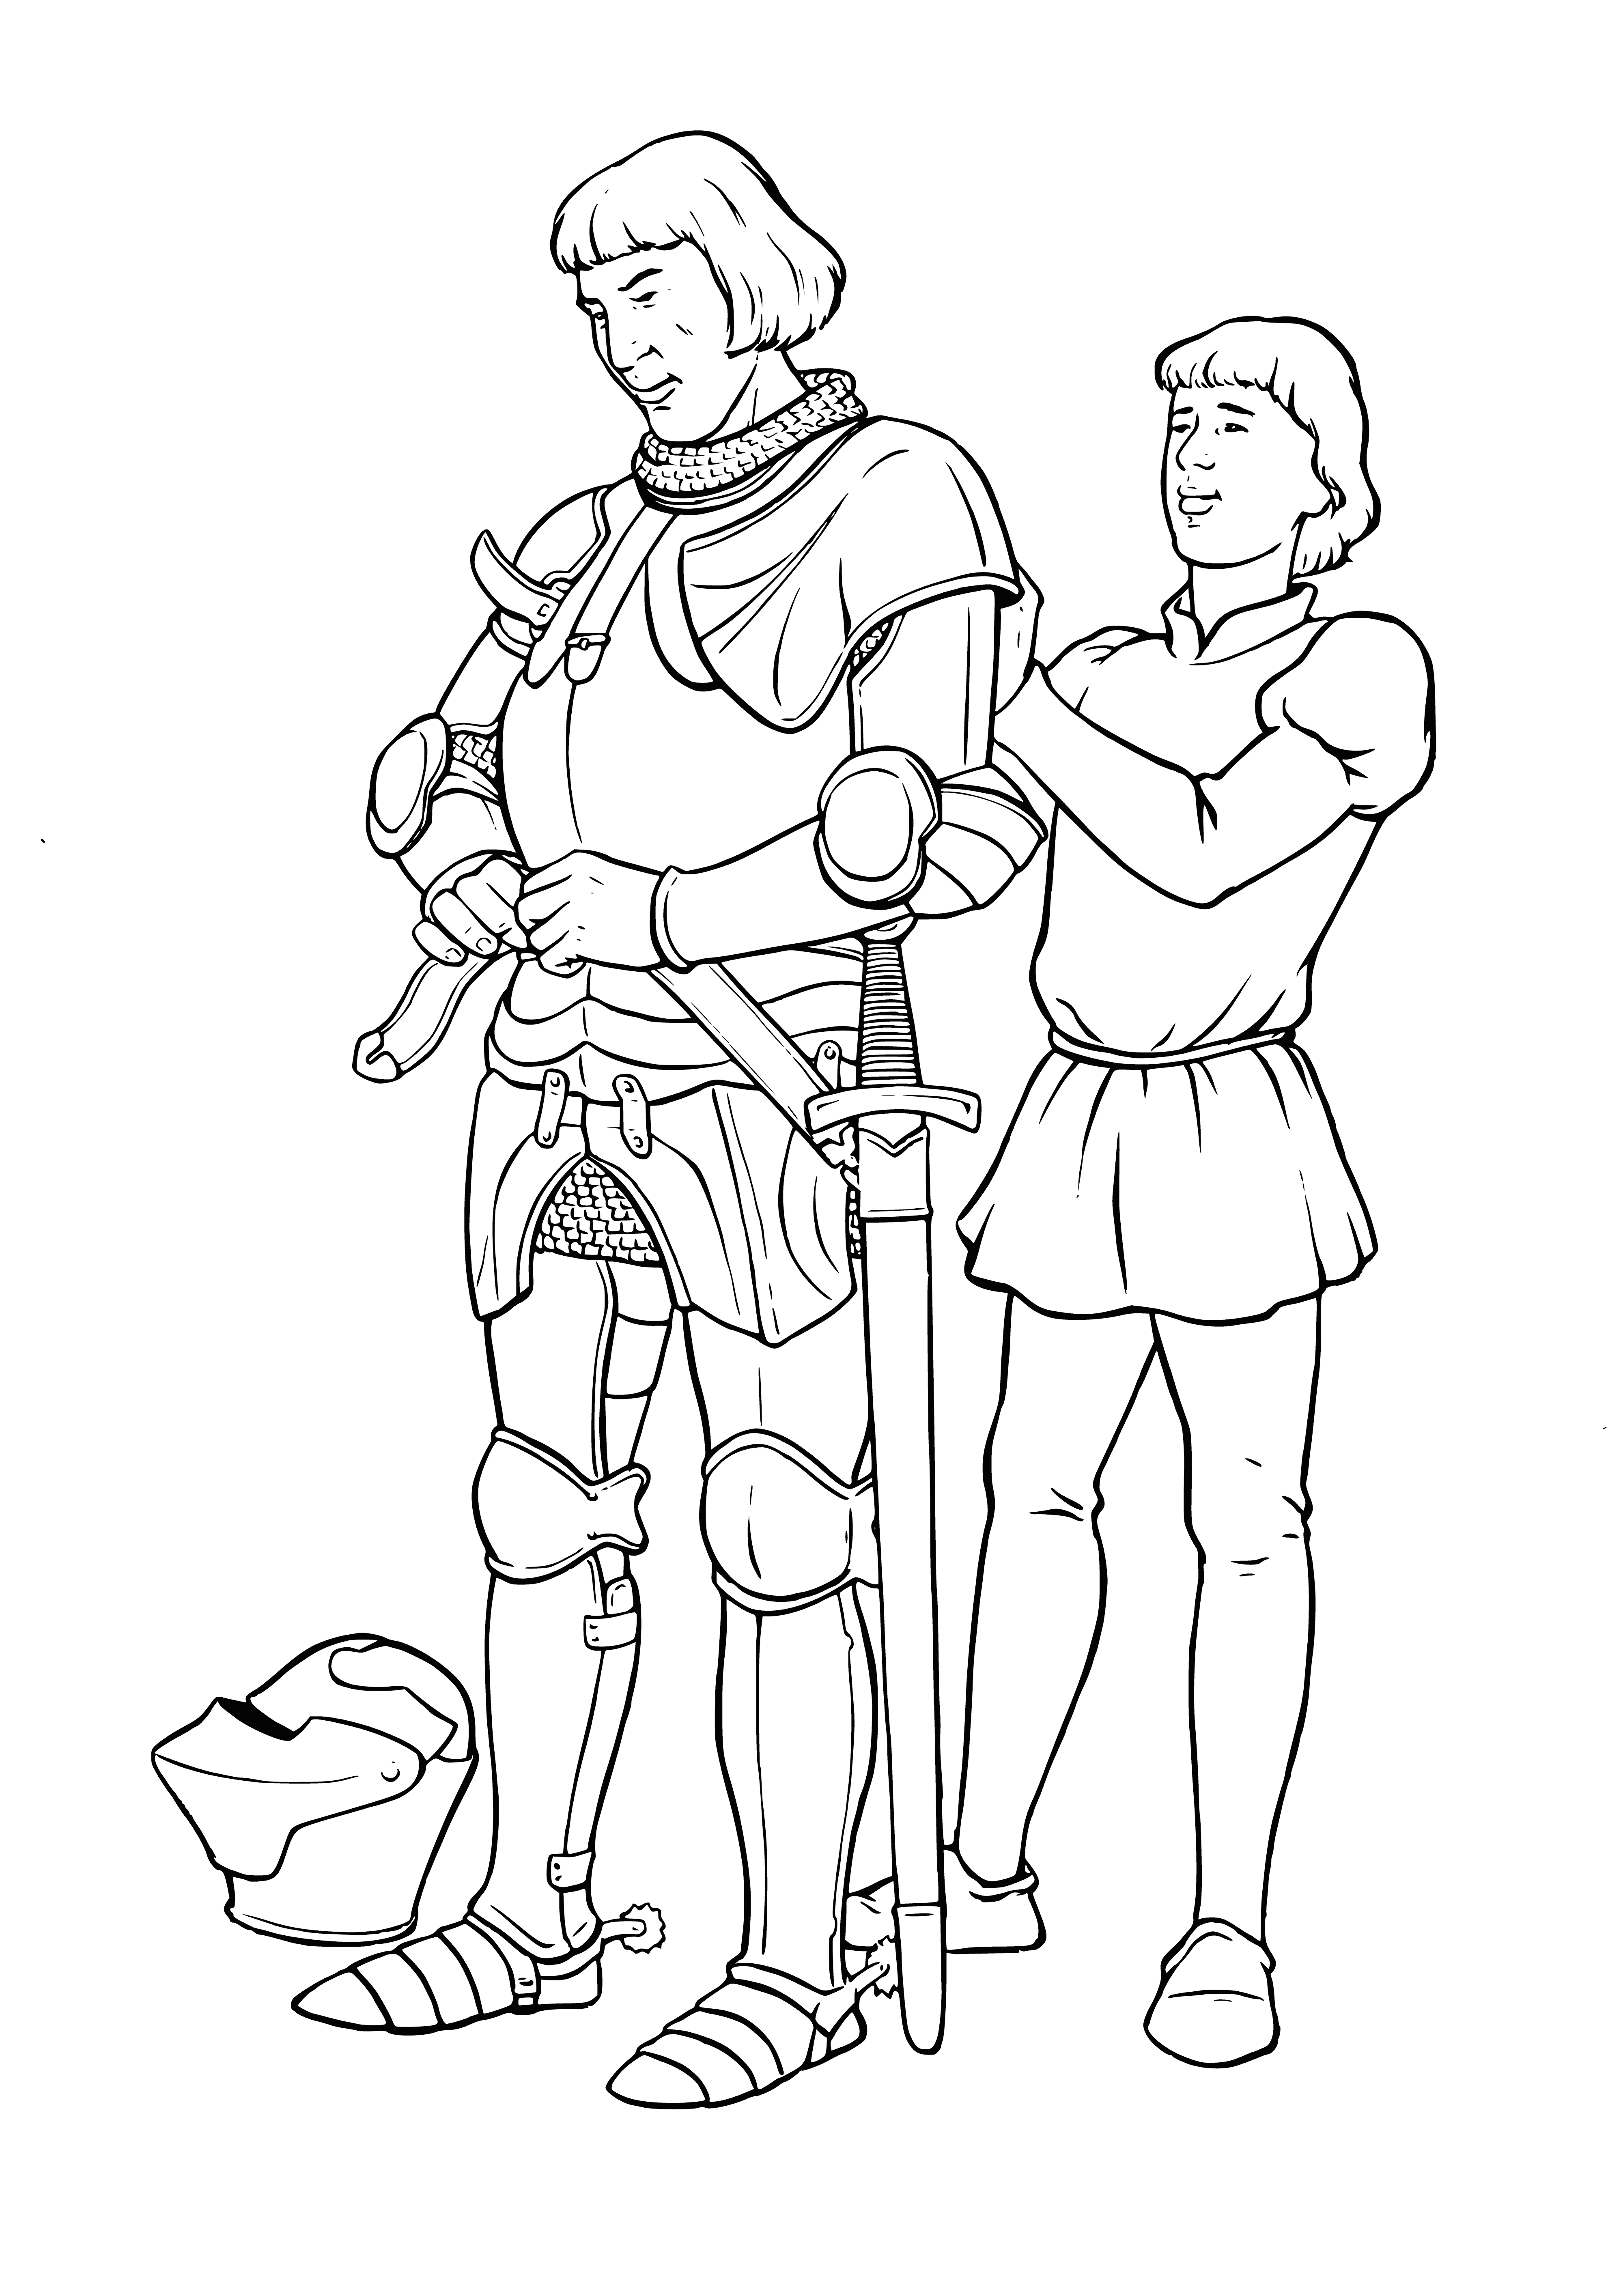 Knight and squire coloring page